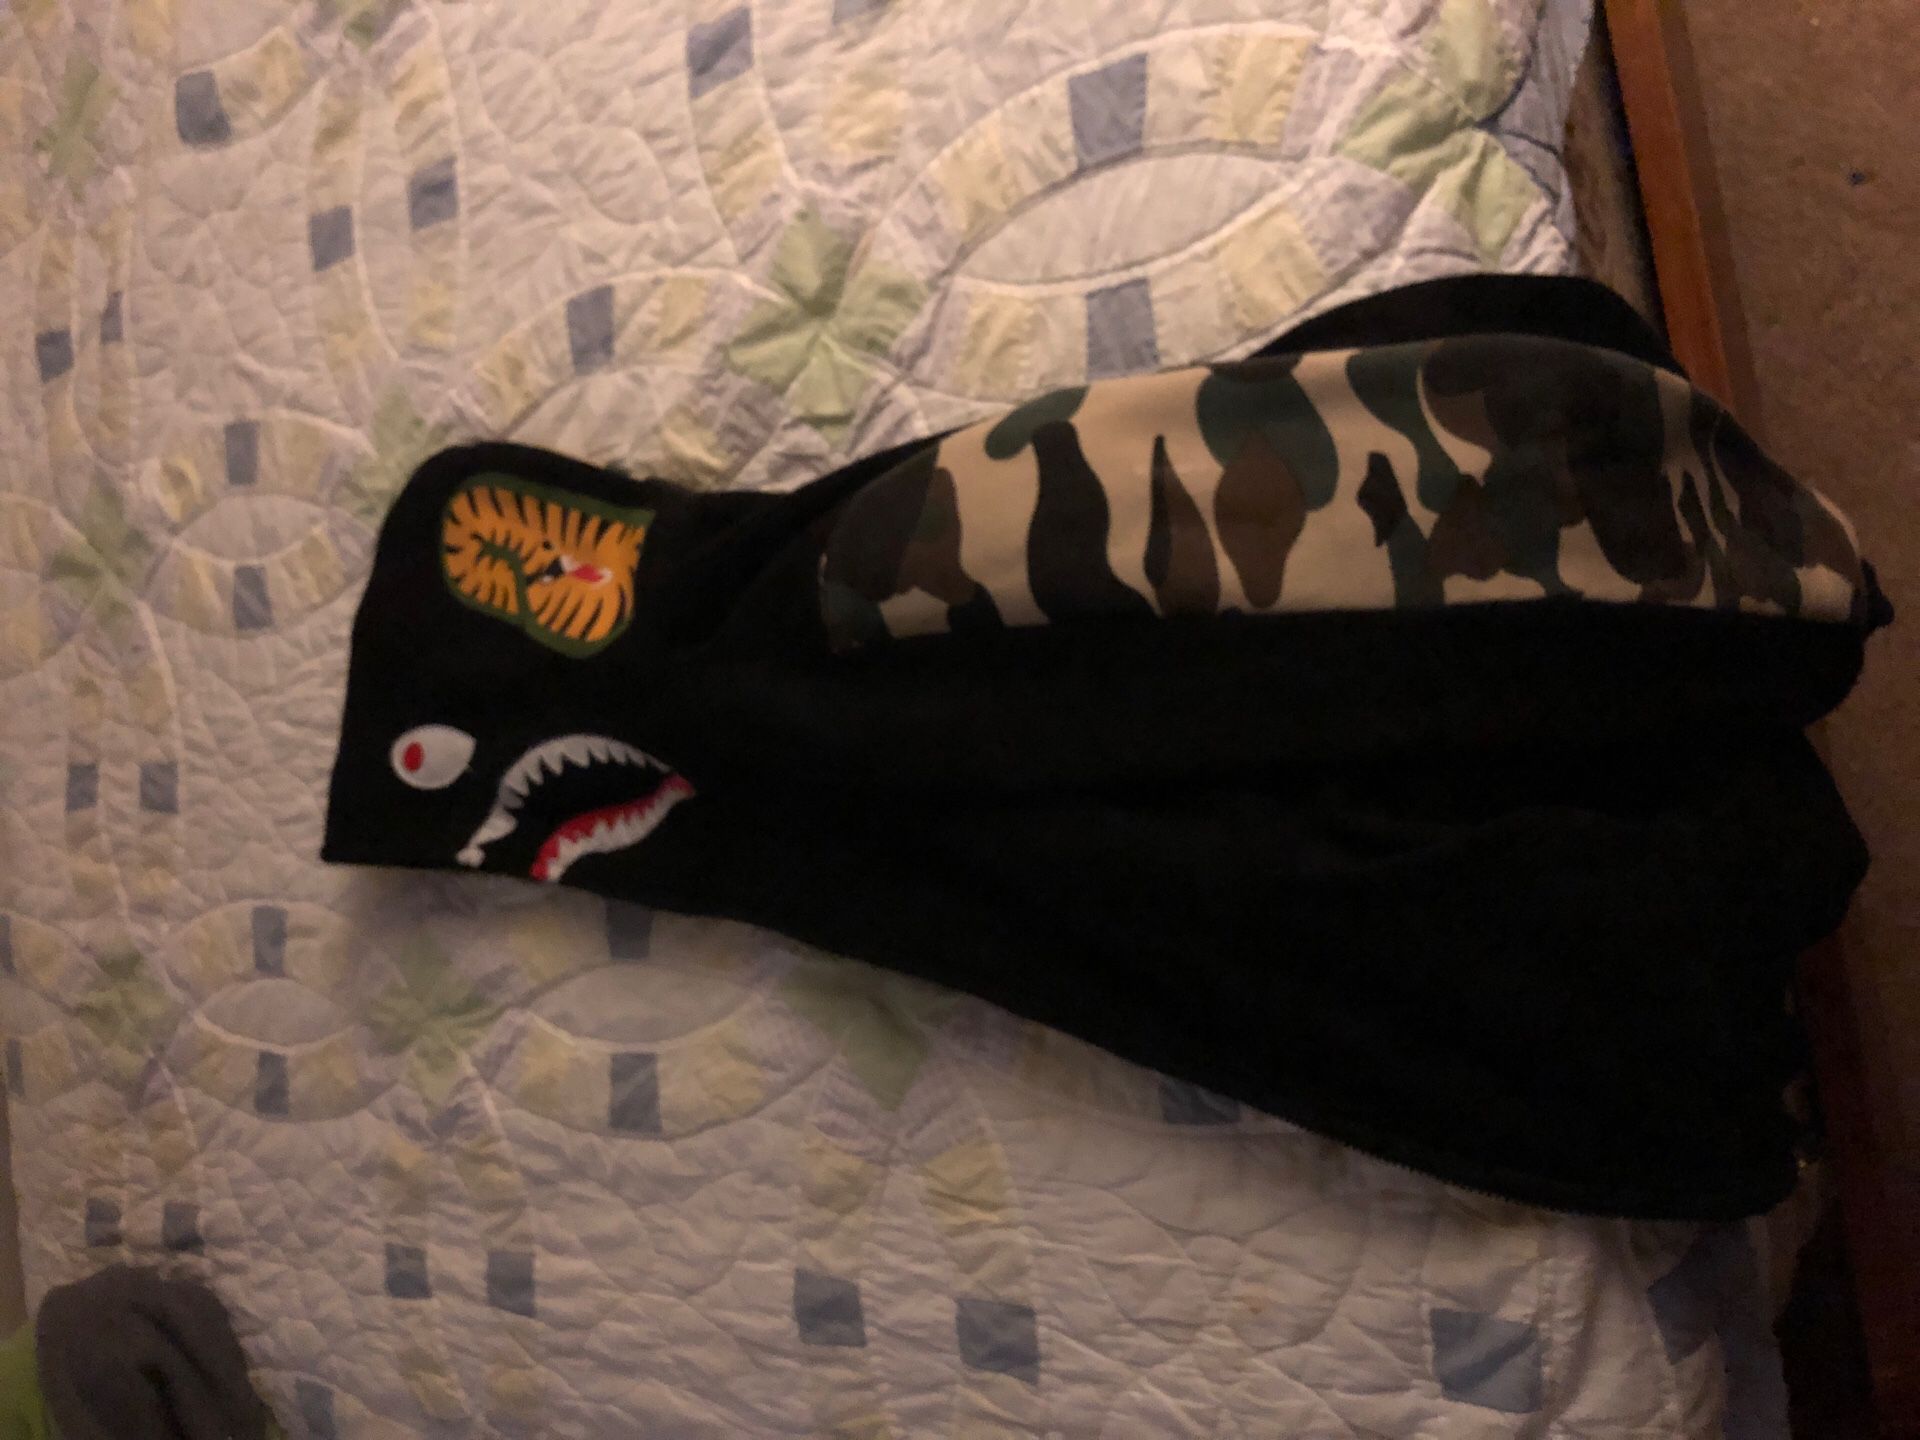 Bape jacket for 220 serious inquires only !!!